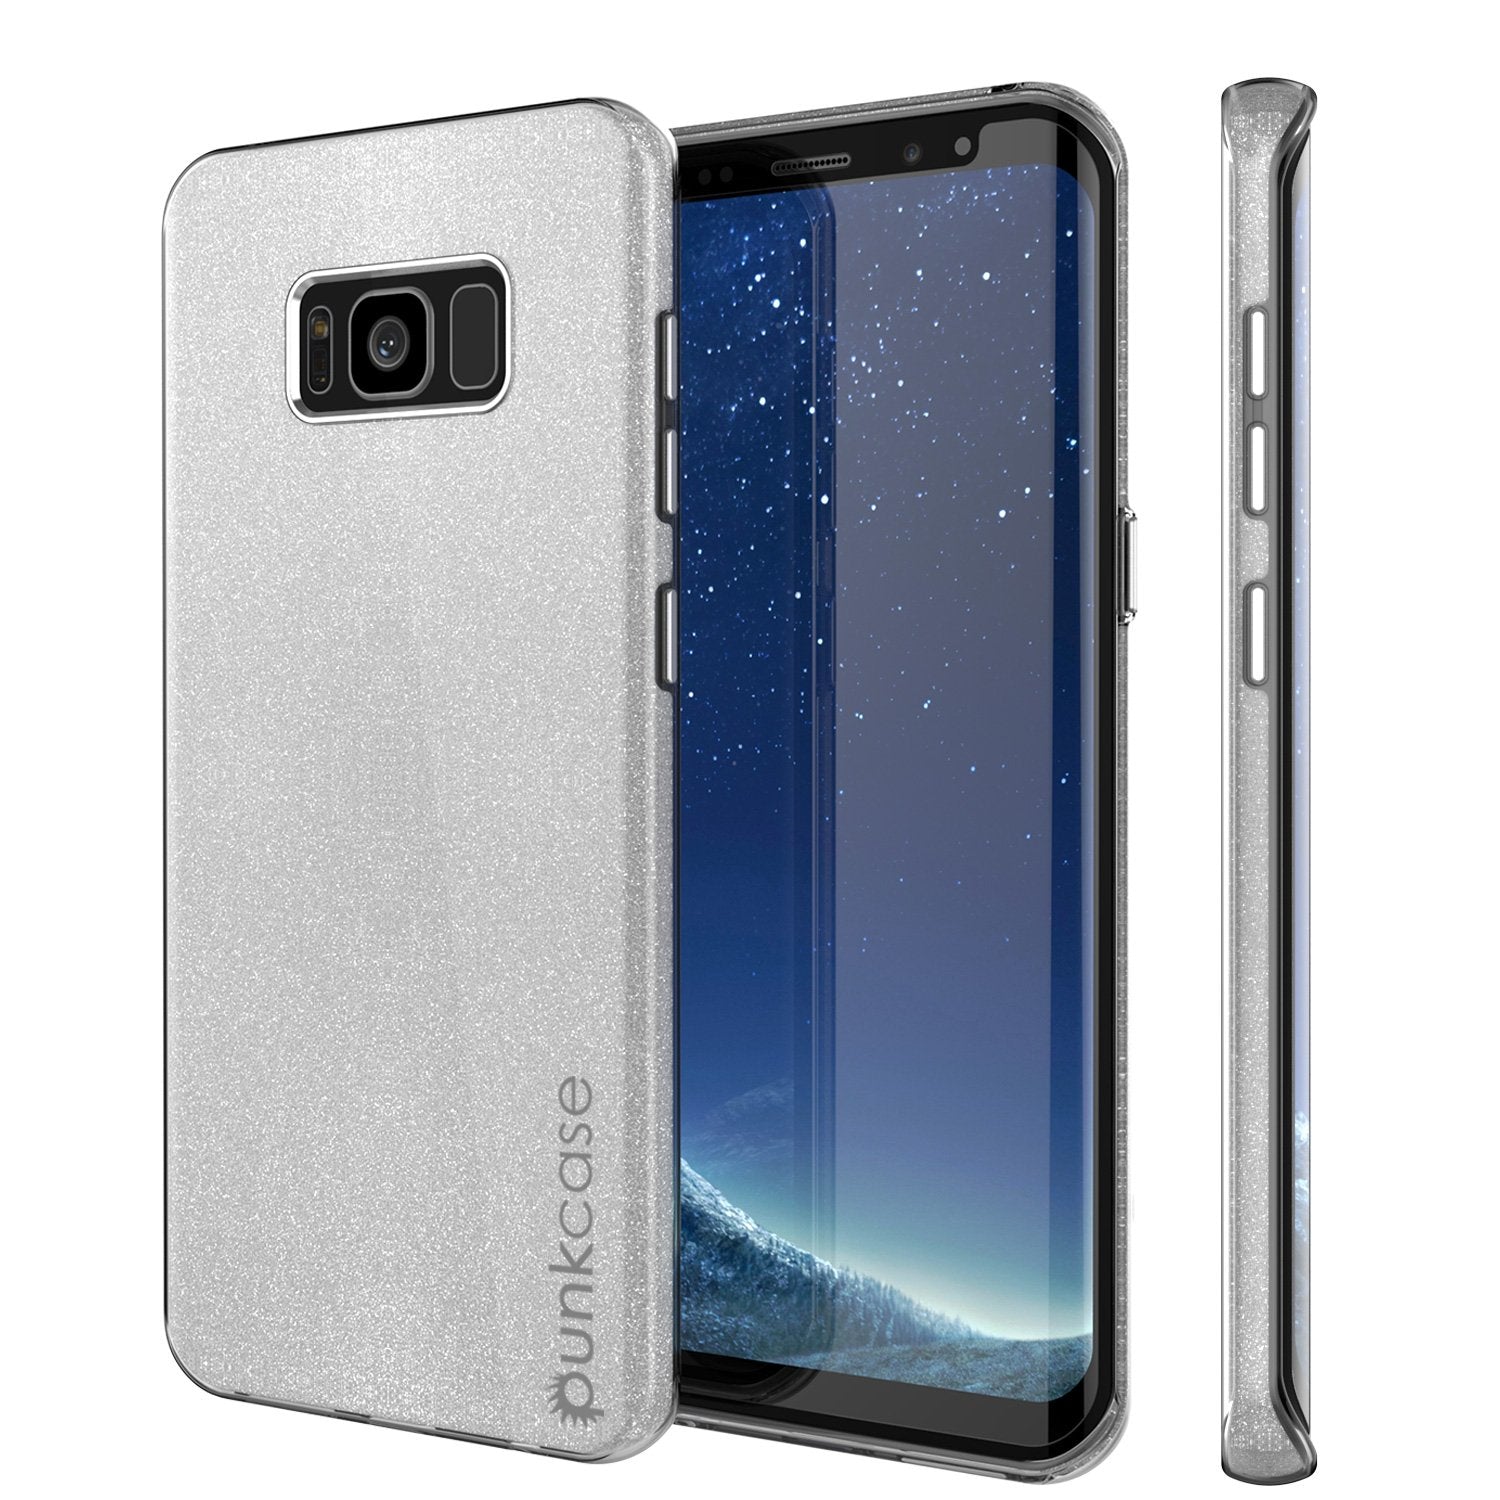 Galaxy S8 Case, Punkcase Galactic 2.0 Series Armor Silver Cover